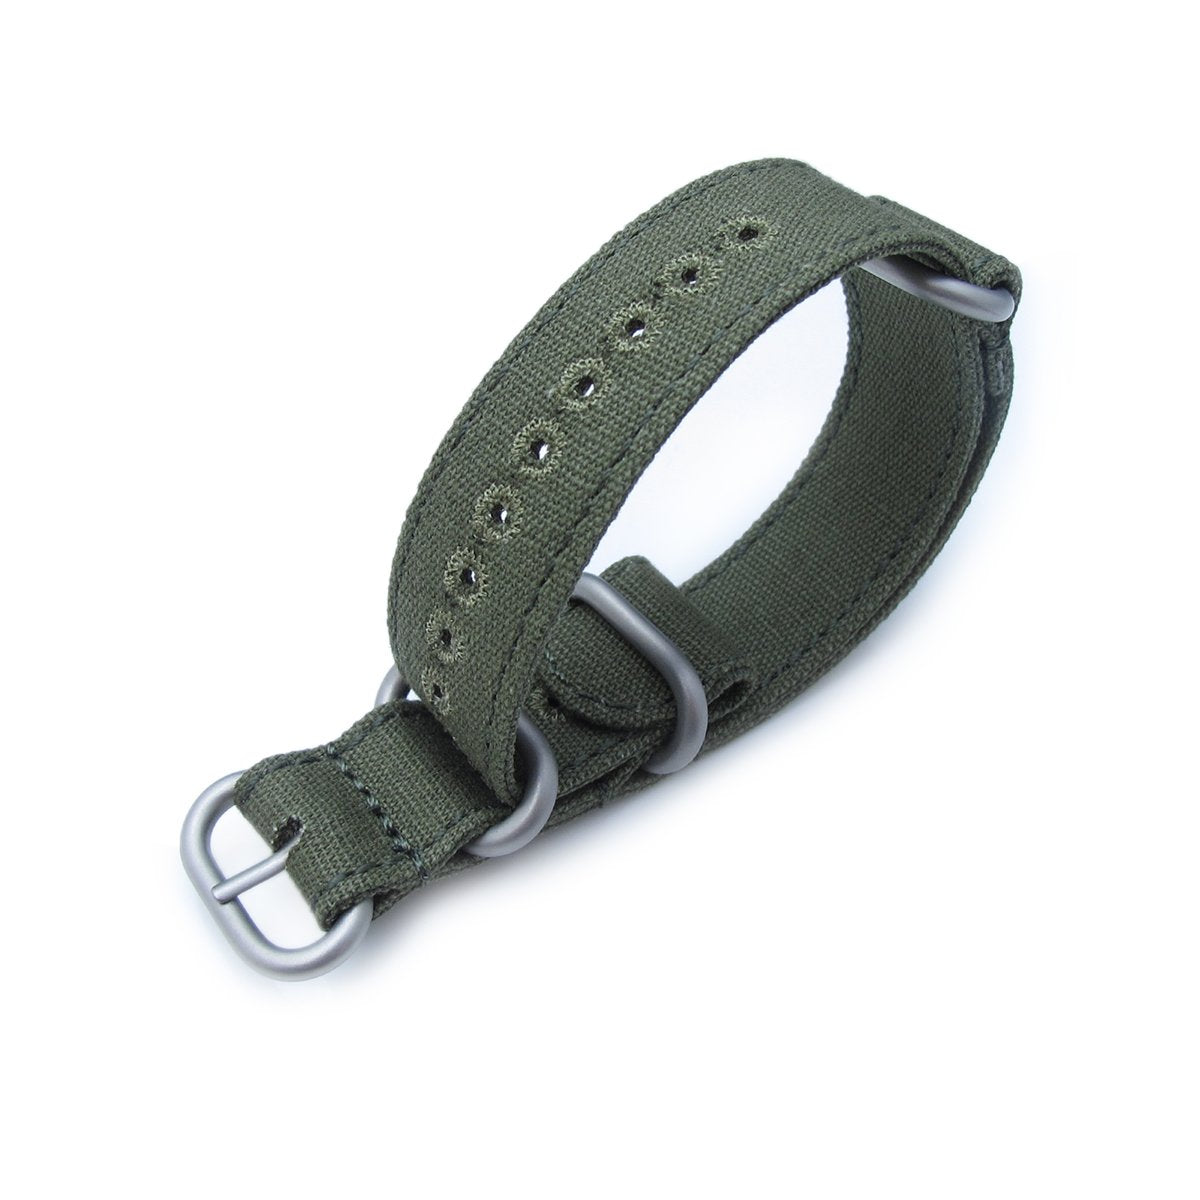 20mm MiLTAT Canvas G10 military watch strap, military color with